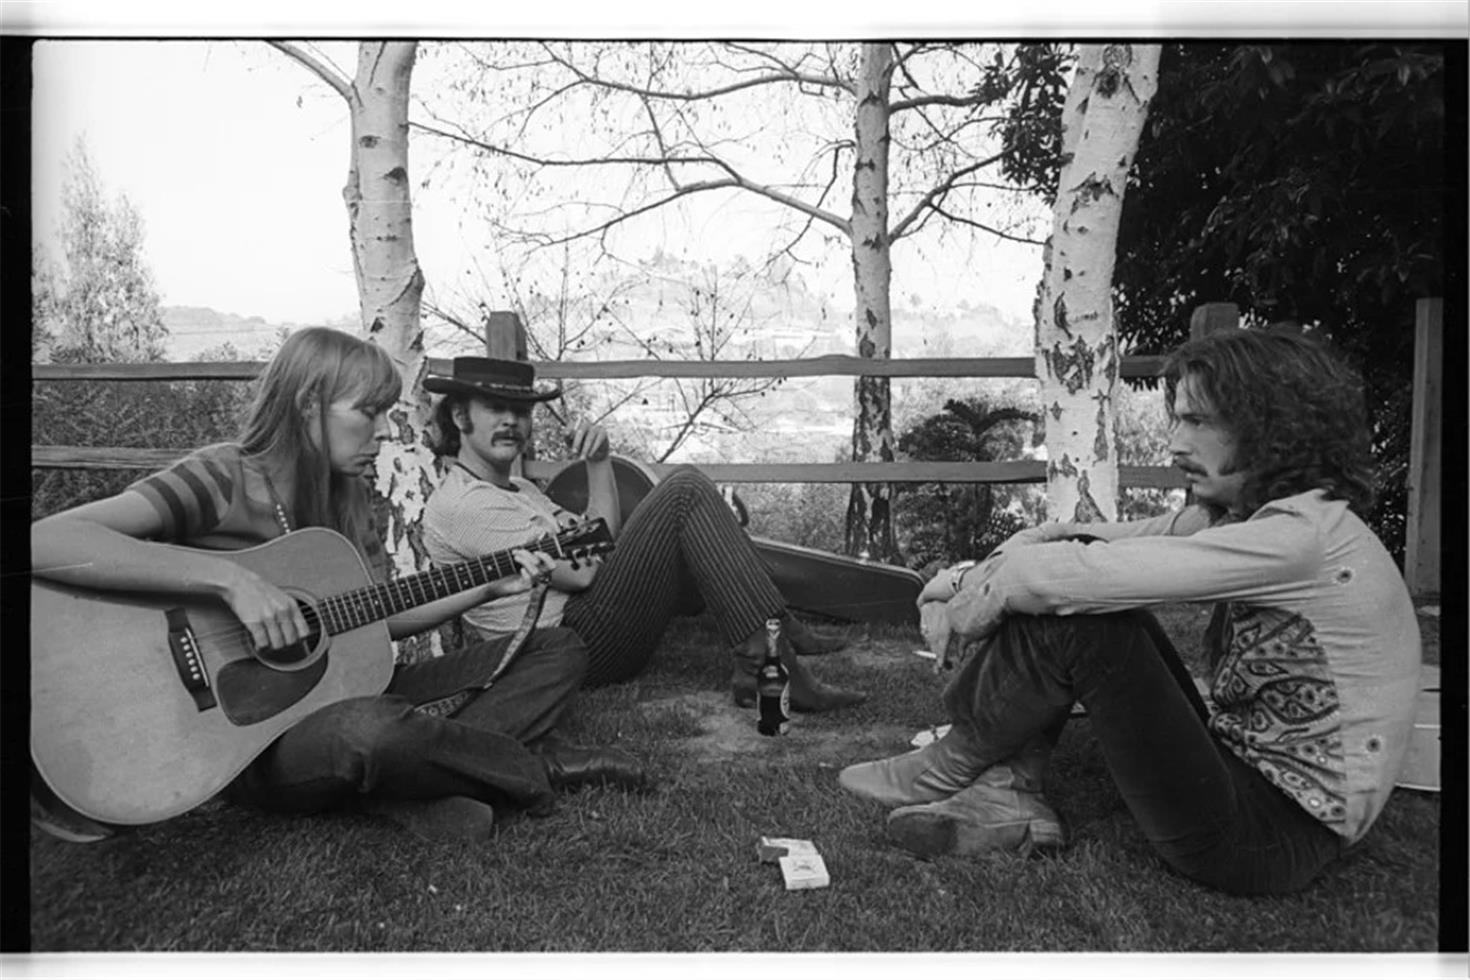 Henry Diltz Black and White Photograph - Joni Mitchell, David Crosby, and Eric Clapton, Laurel Canyon, 1968